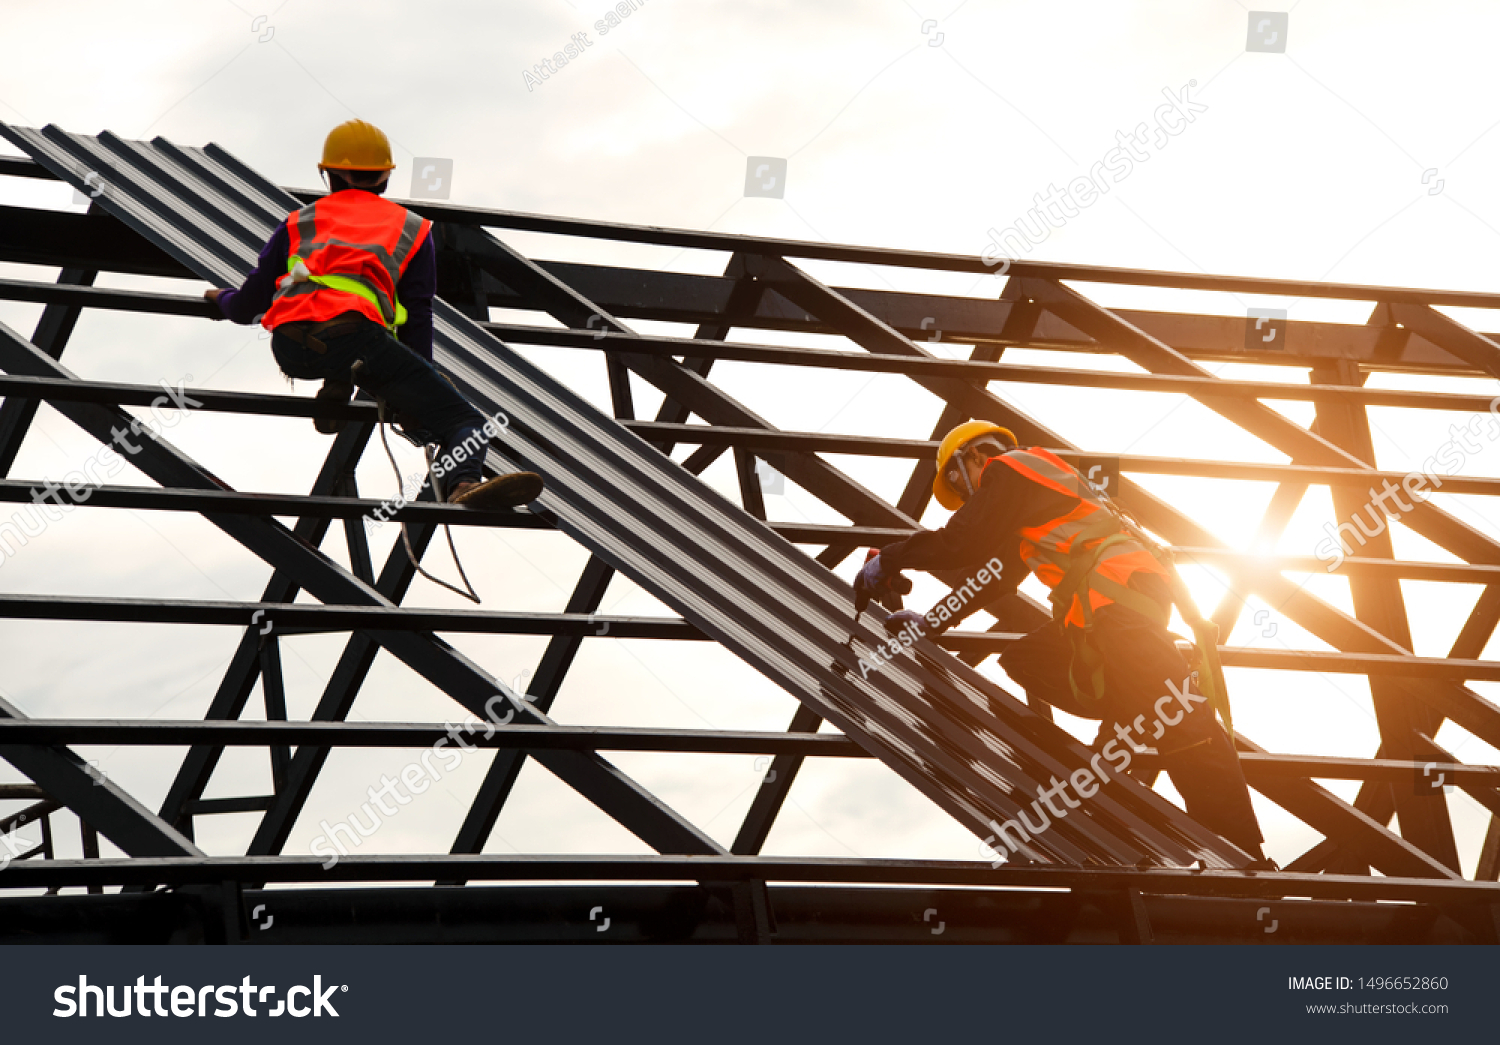 Construction engineer wear safety uniform using an electric drill and screw tools to fasten down metal roofing work for roof industrial concept with copy space #1496652860